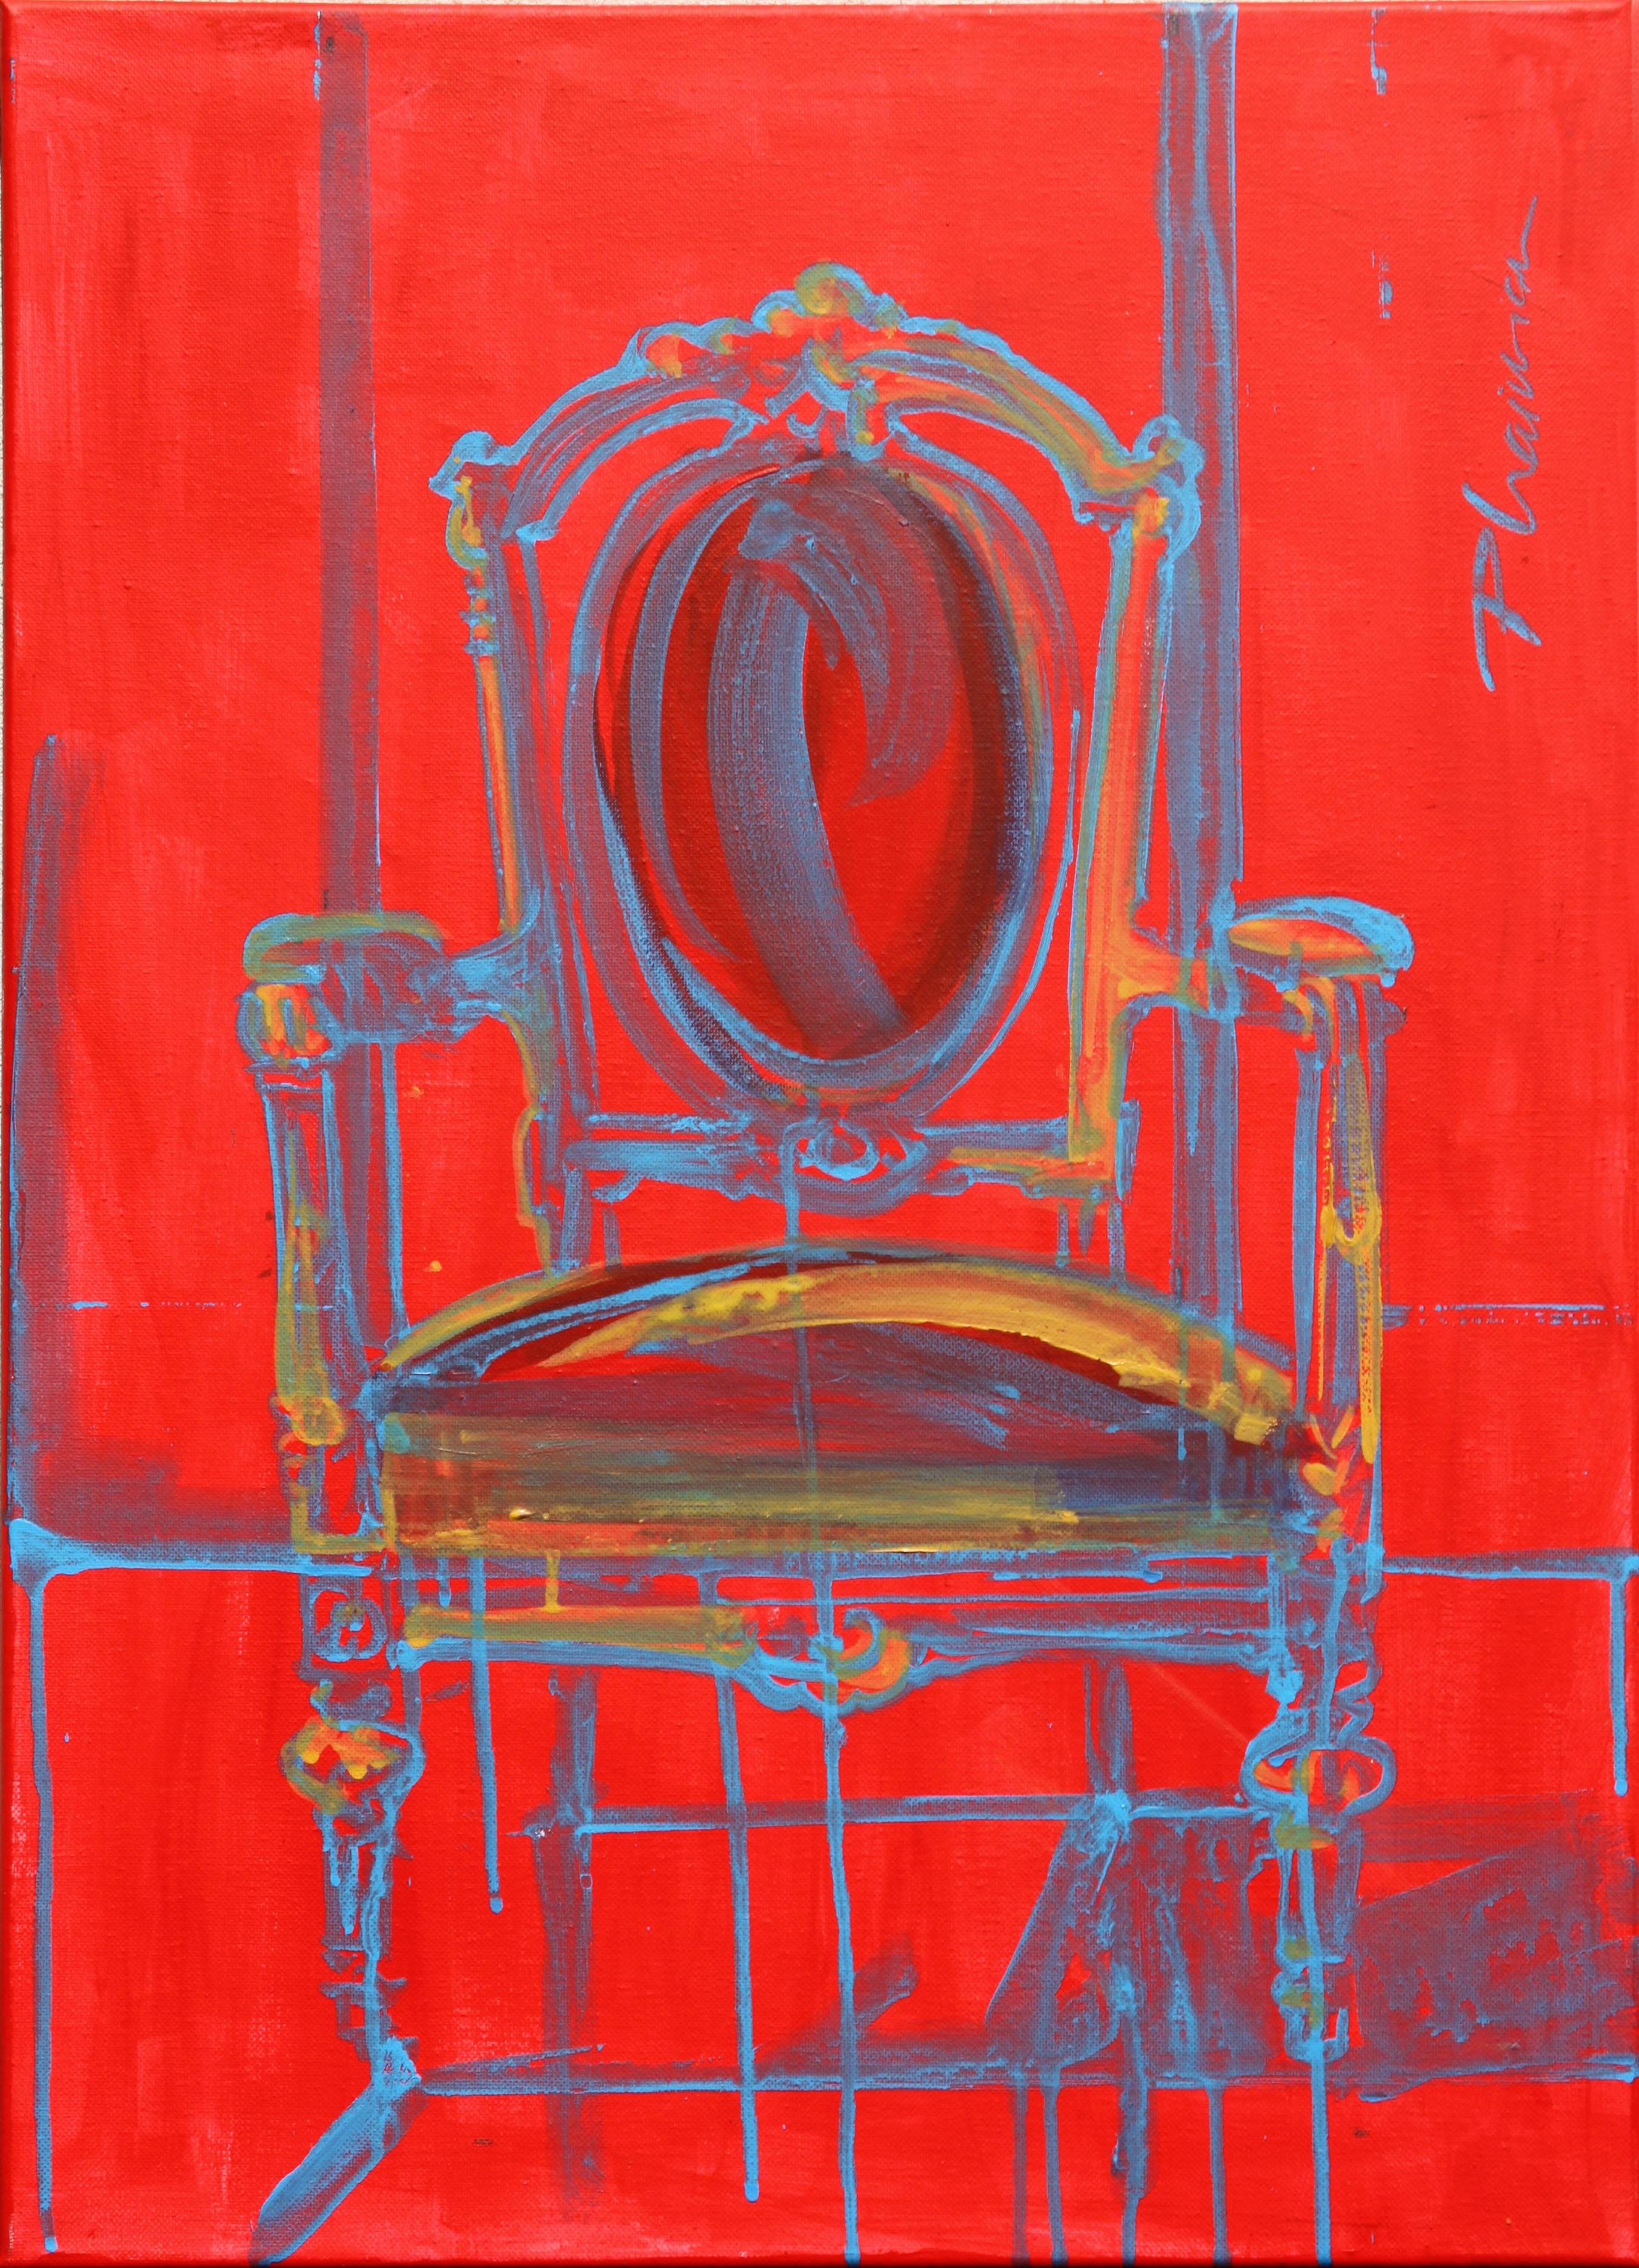 Louis XVI #2
Part of "Mixed Moods" solo show, until September 29.
Original painting.  Size 27.5x19.5in / 70x50cm . Acrylic on canvas.

The period armchair, style Louis XVI, become the subject of a series of paintings. This armchair is in my studio,